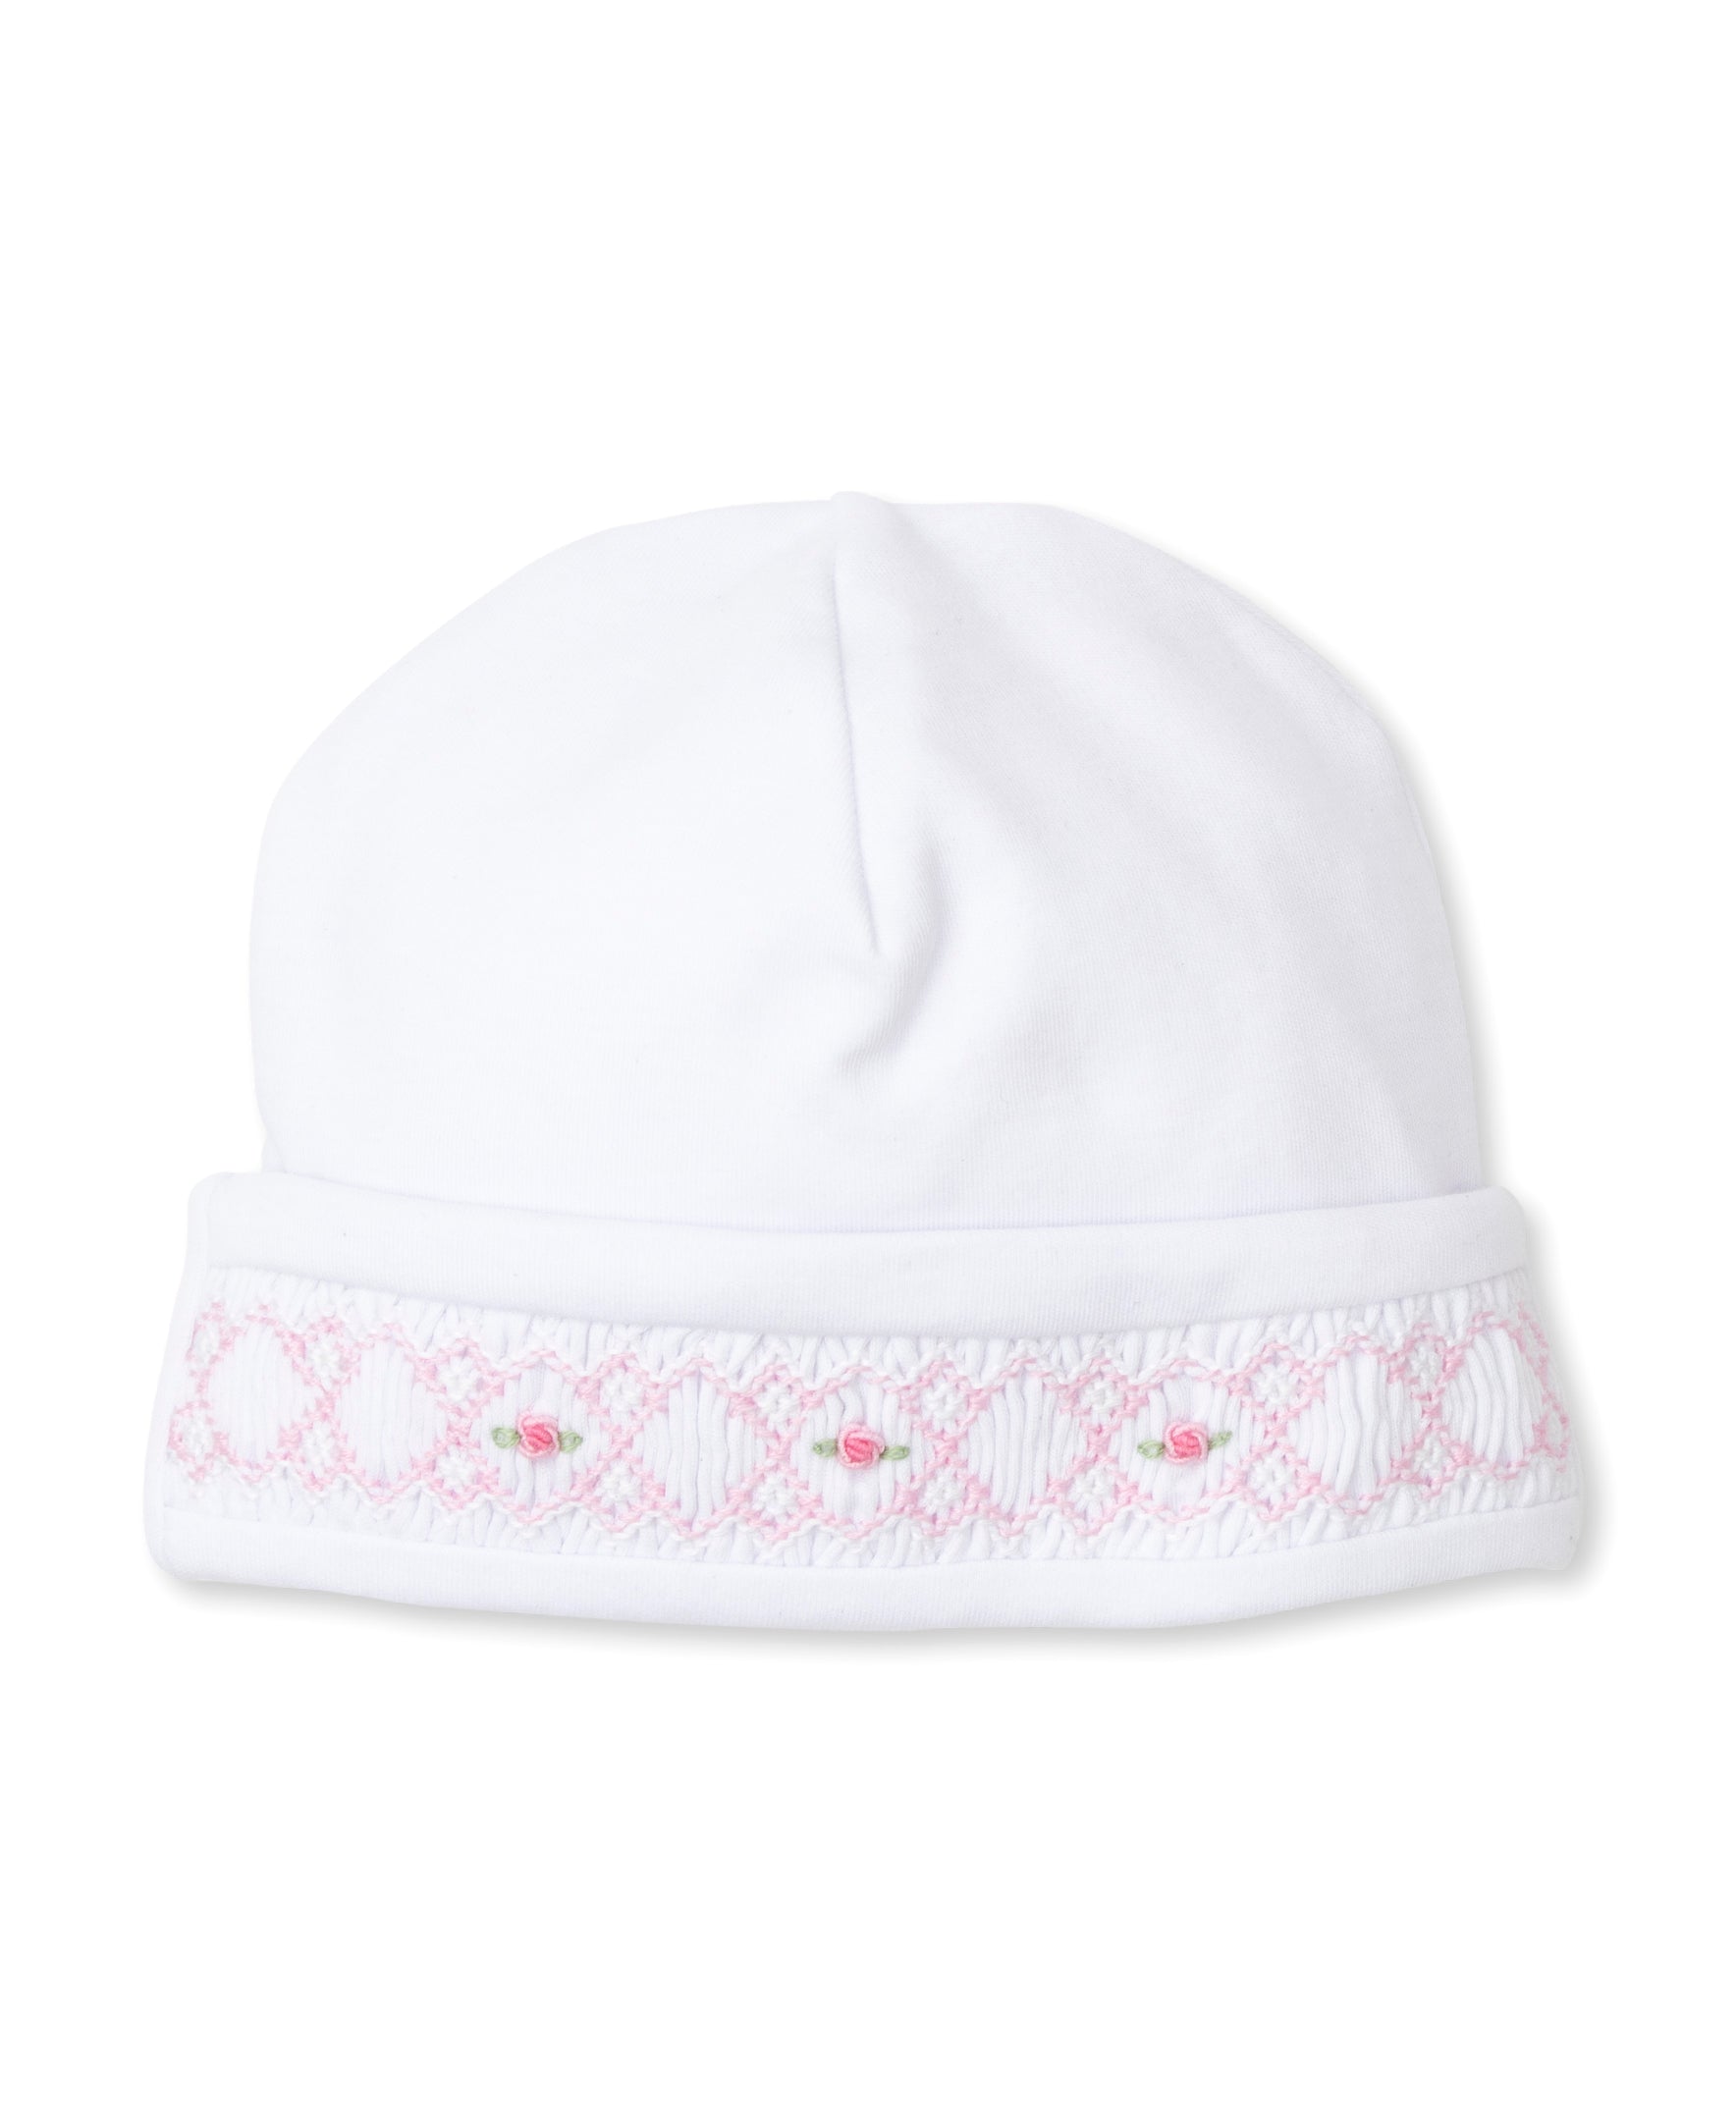 CLB Summer 24 White/Pink Hand Smocked Hat - Kissy Kissy